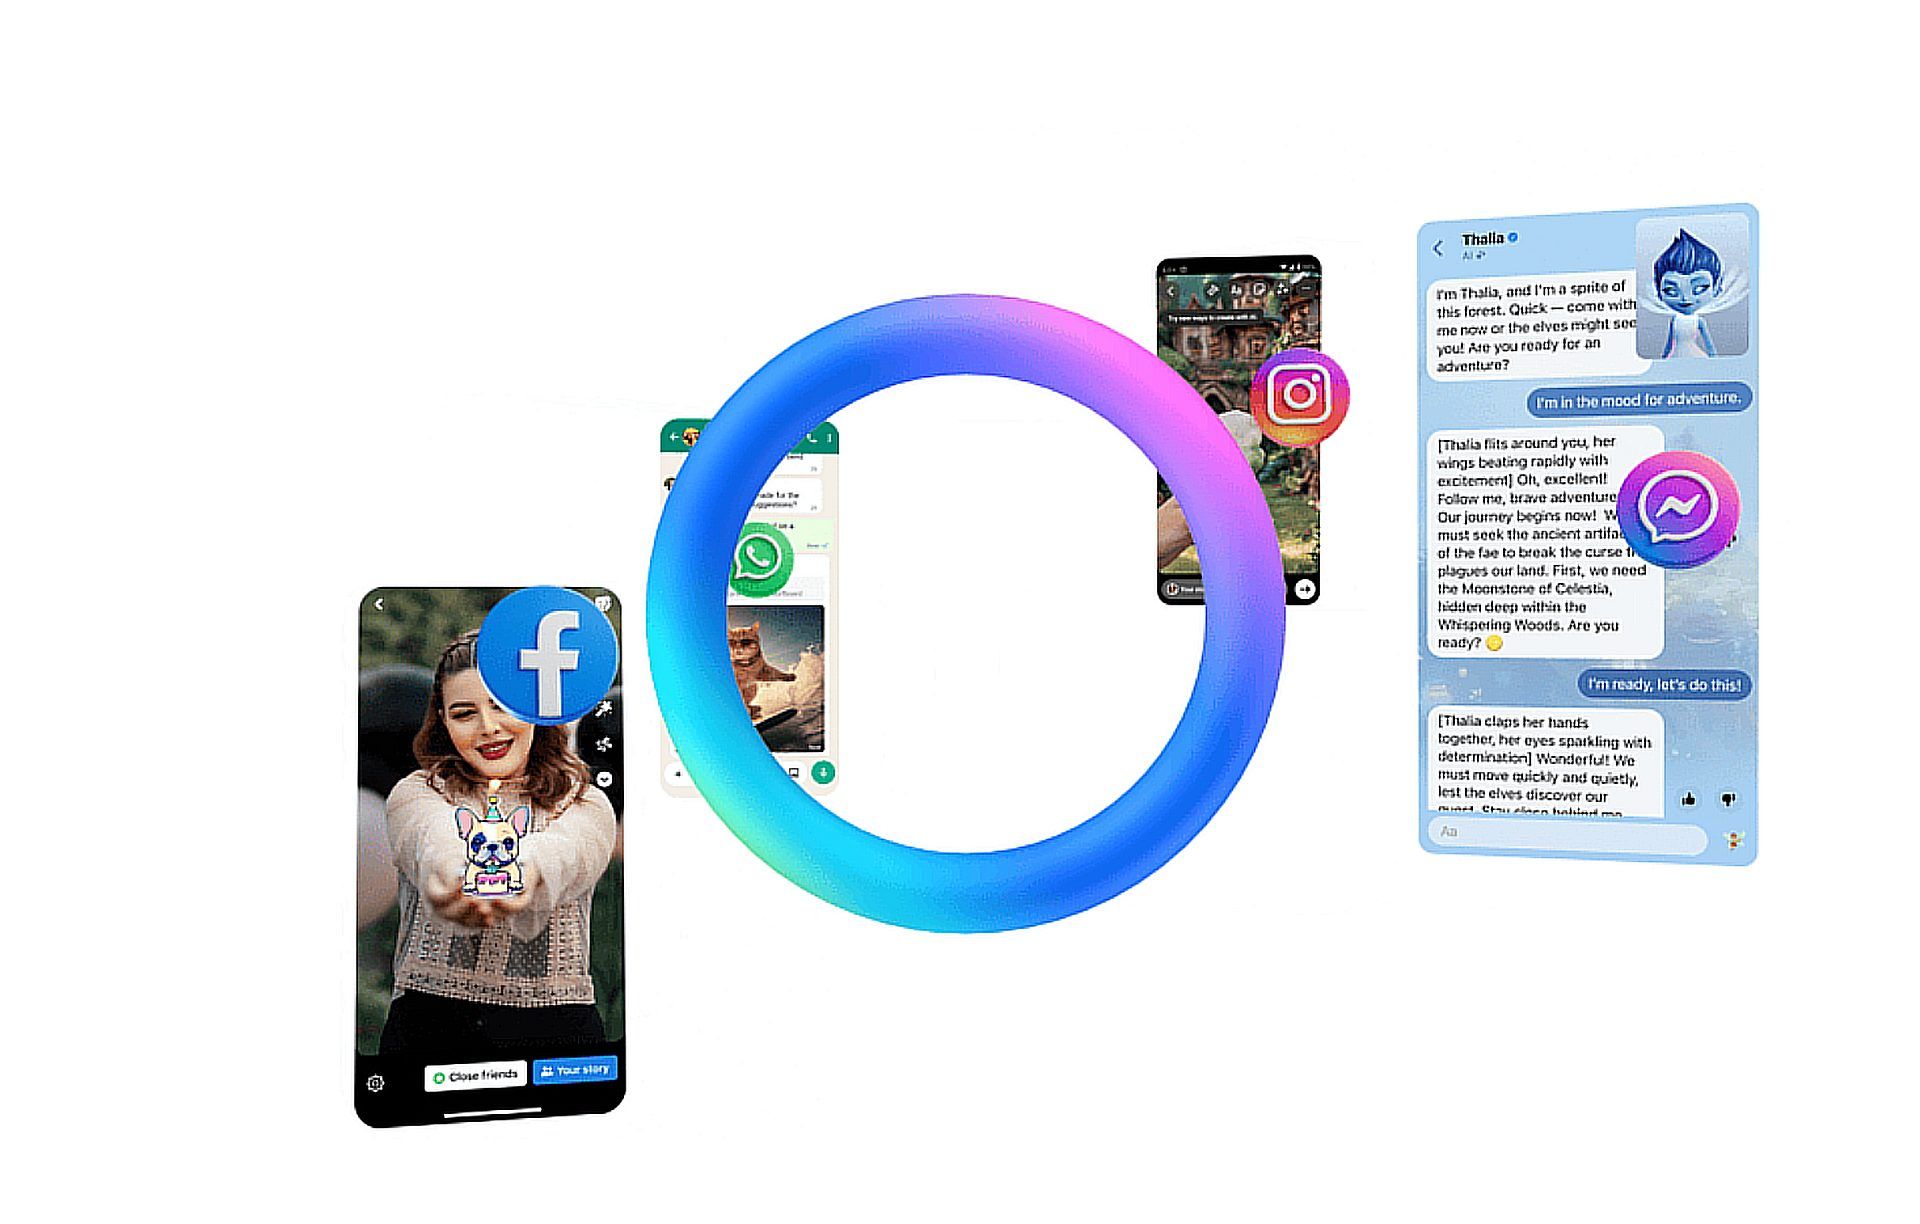 Through this article, you can learn how to use Meta AI easily in Whatsapp, Instagram and Messenger. Read on and explore now!